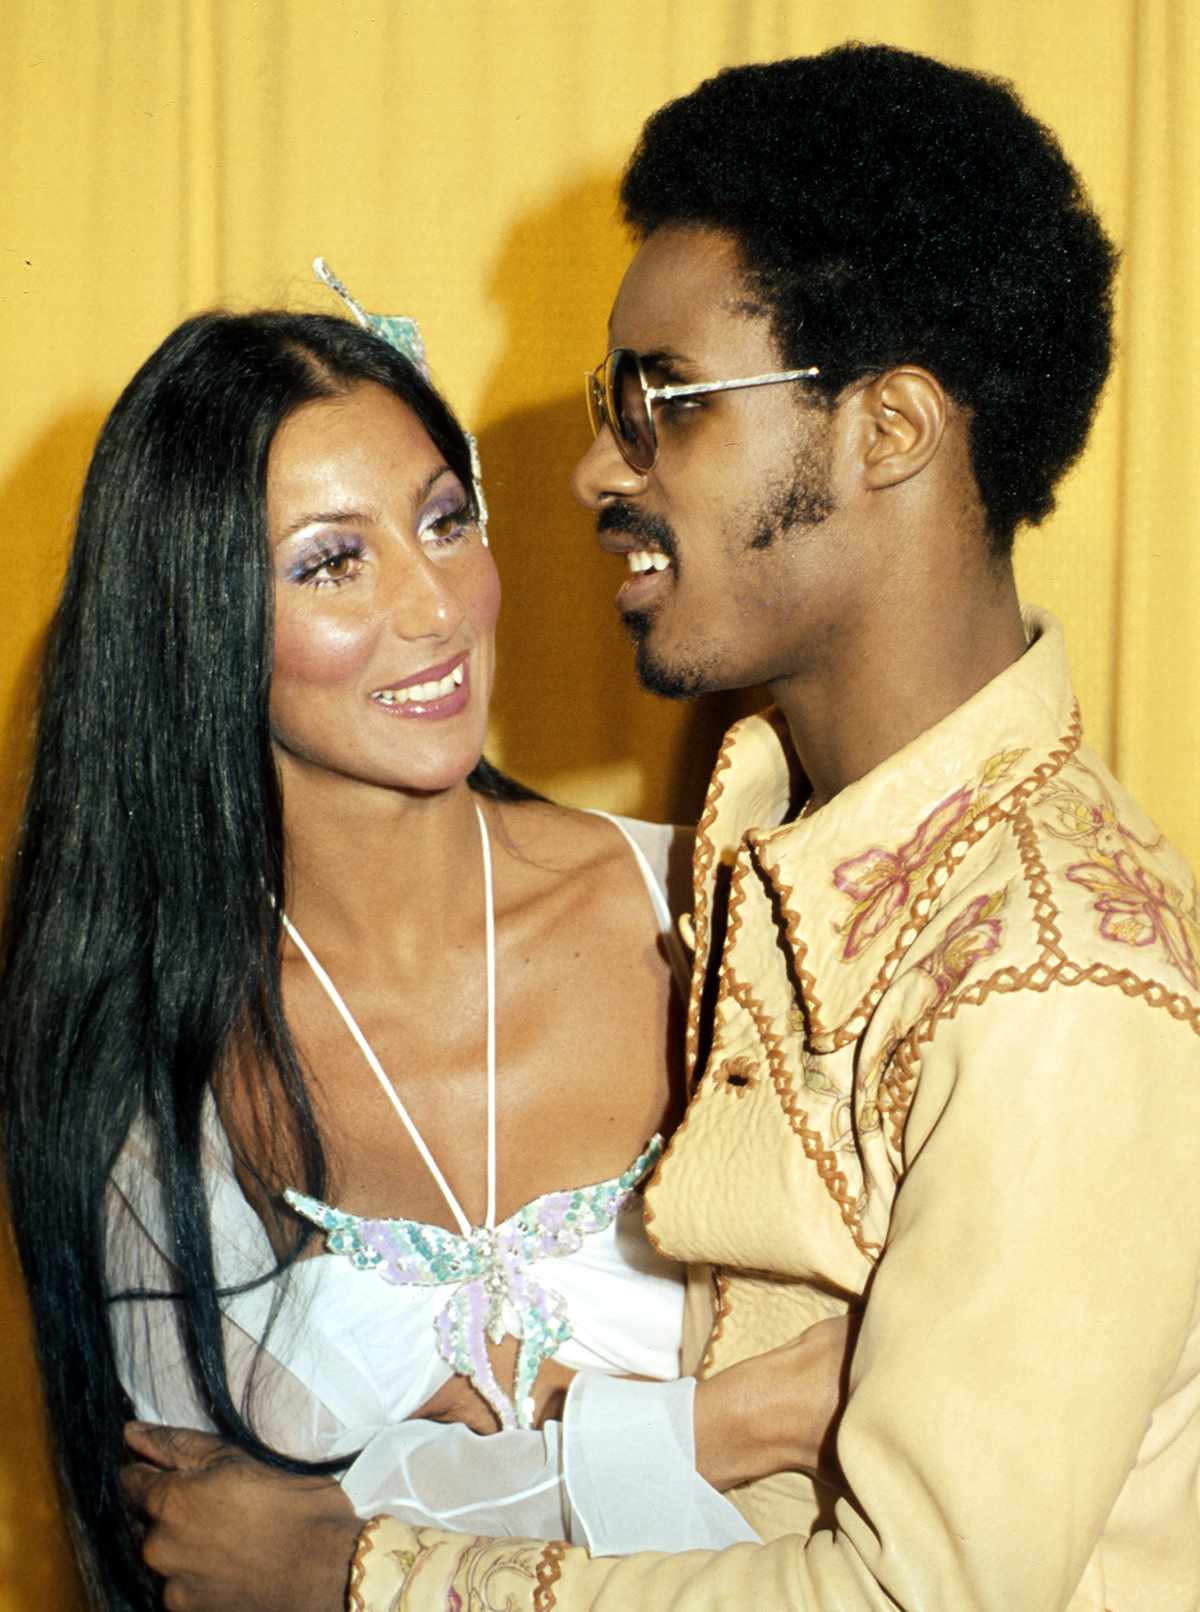 Entertainers Cher and Stevie Wonder attend the Grammy awards wearing a large butterfly pin in her hair on March 2, 1974 in Los Angeles, California